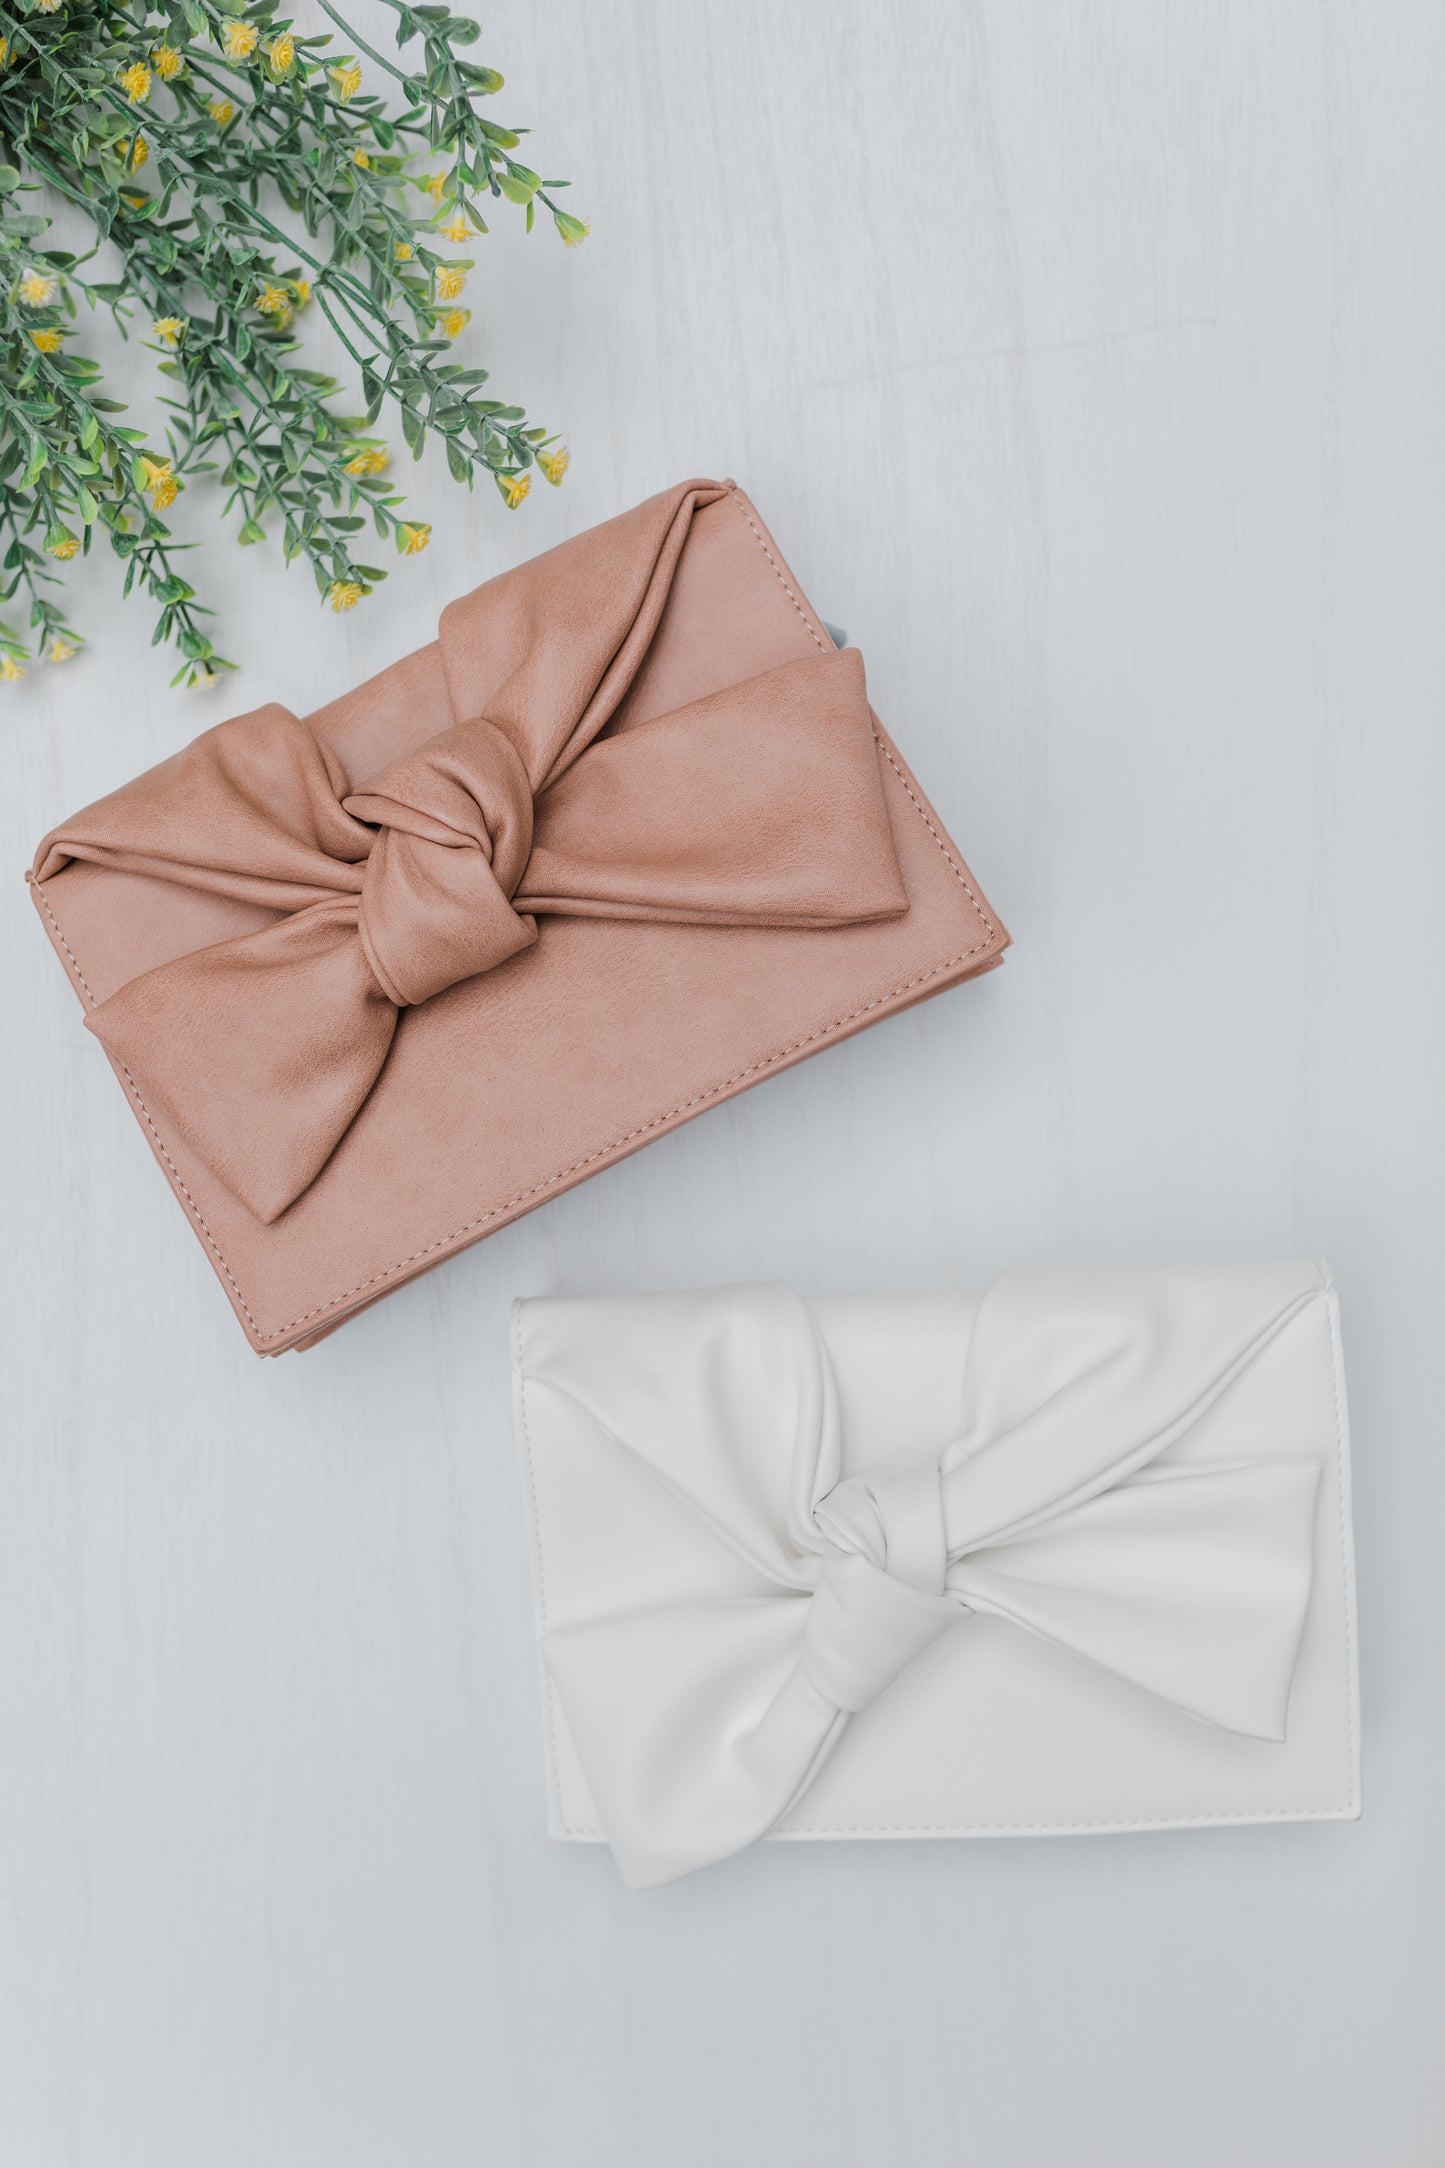 Knotted Bow Front Clutch Bag